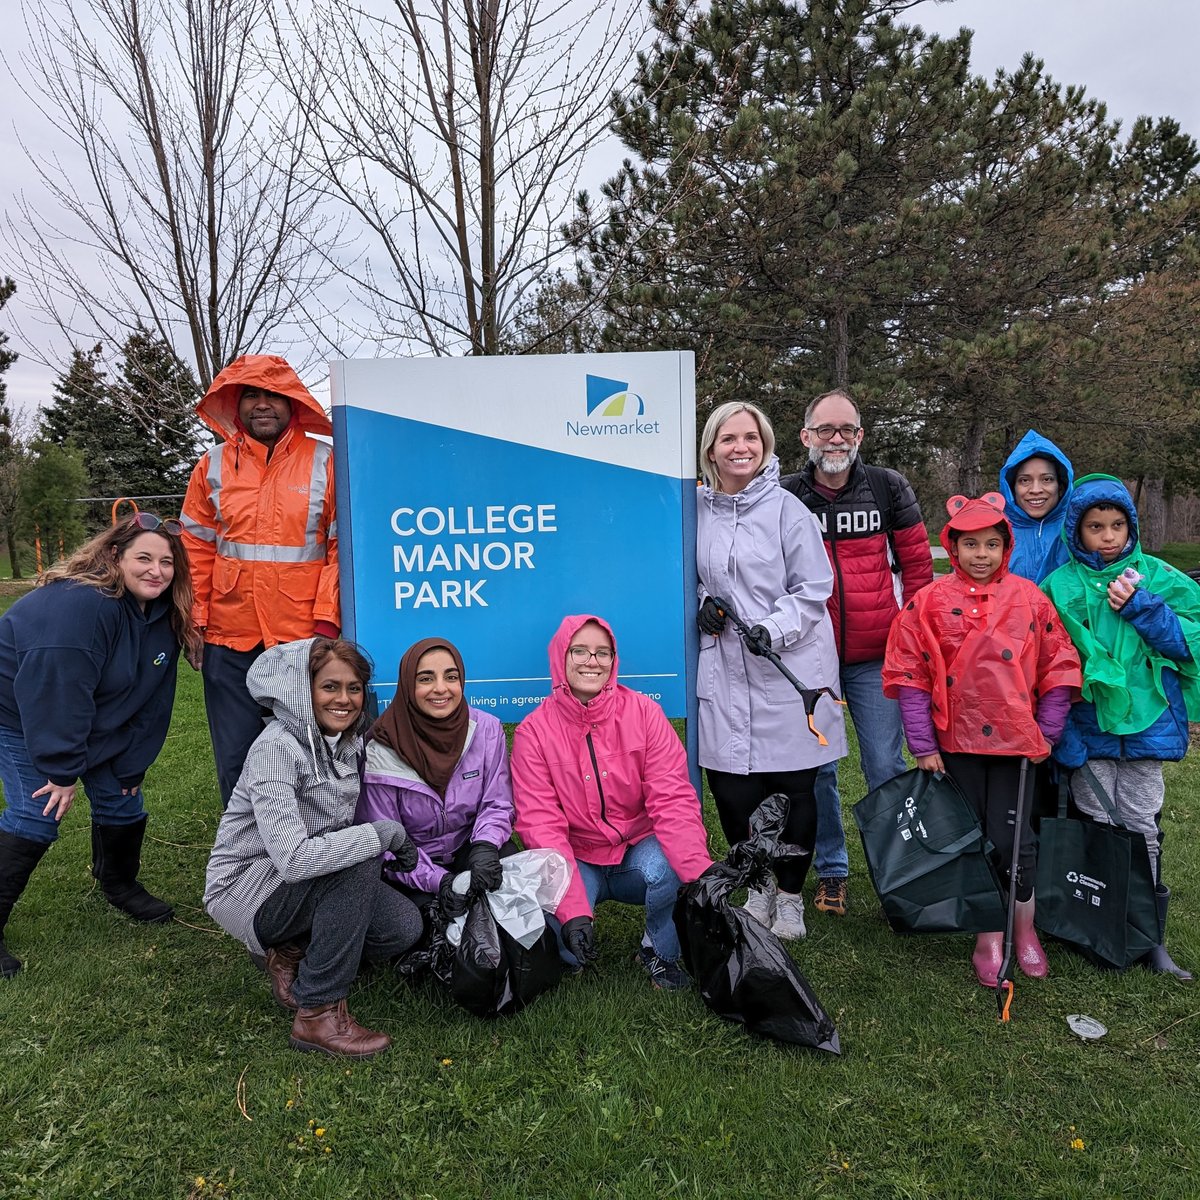 On Saturday, April 27, York Region CAS staff with the help of their families and friends got together to clean-up College Manor Park in Newmarket and remove litter from the beautiful green space. #SpringCleanUp #YRCAS #YorkRegion #Community